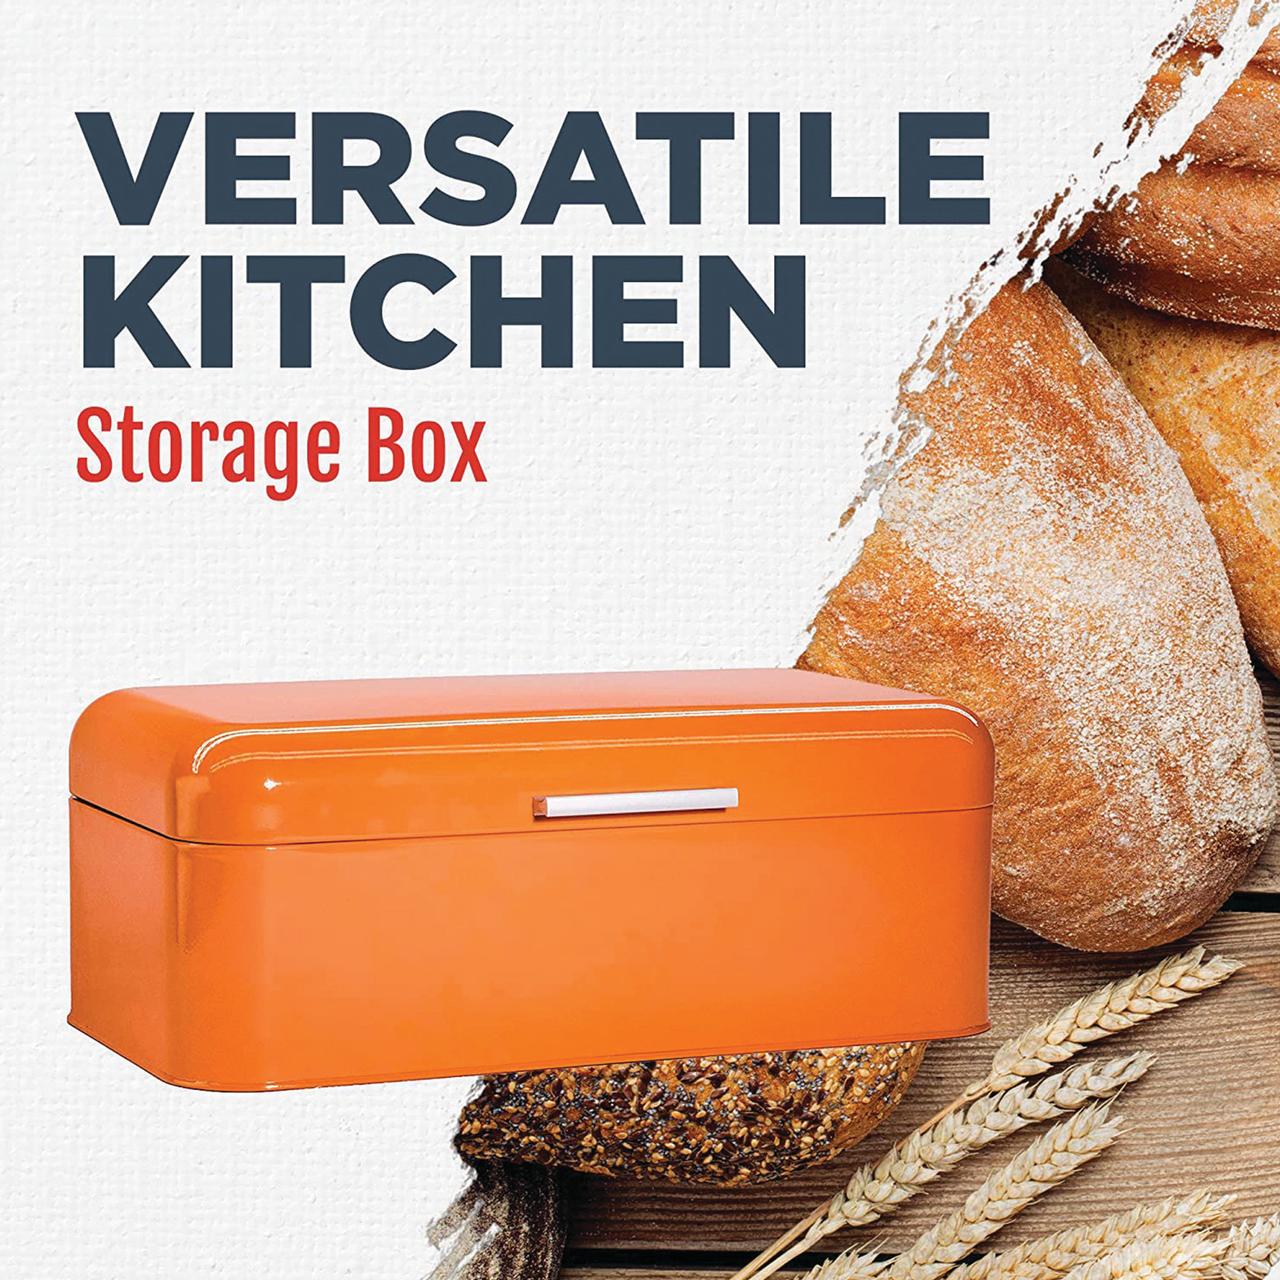 Culinary Couture Stainless Steel Bread Box for Kitchen Countertop Metal Storage Container Orange - image 4 of 8